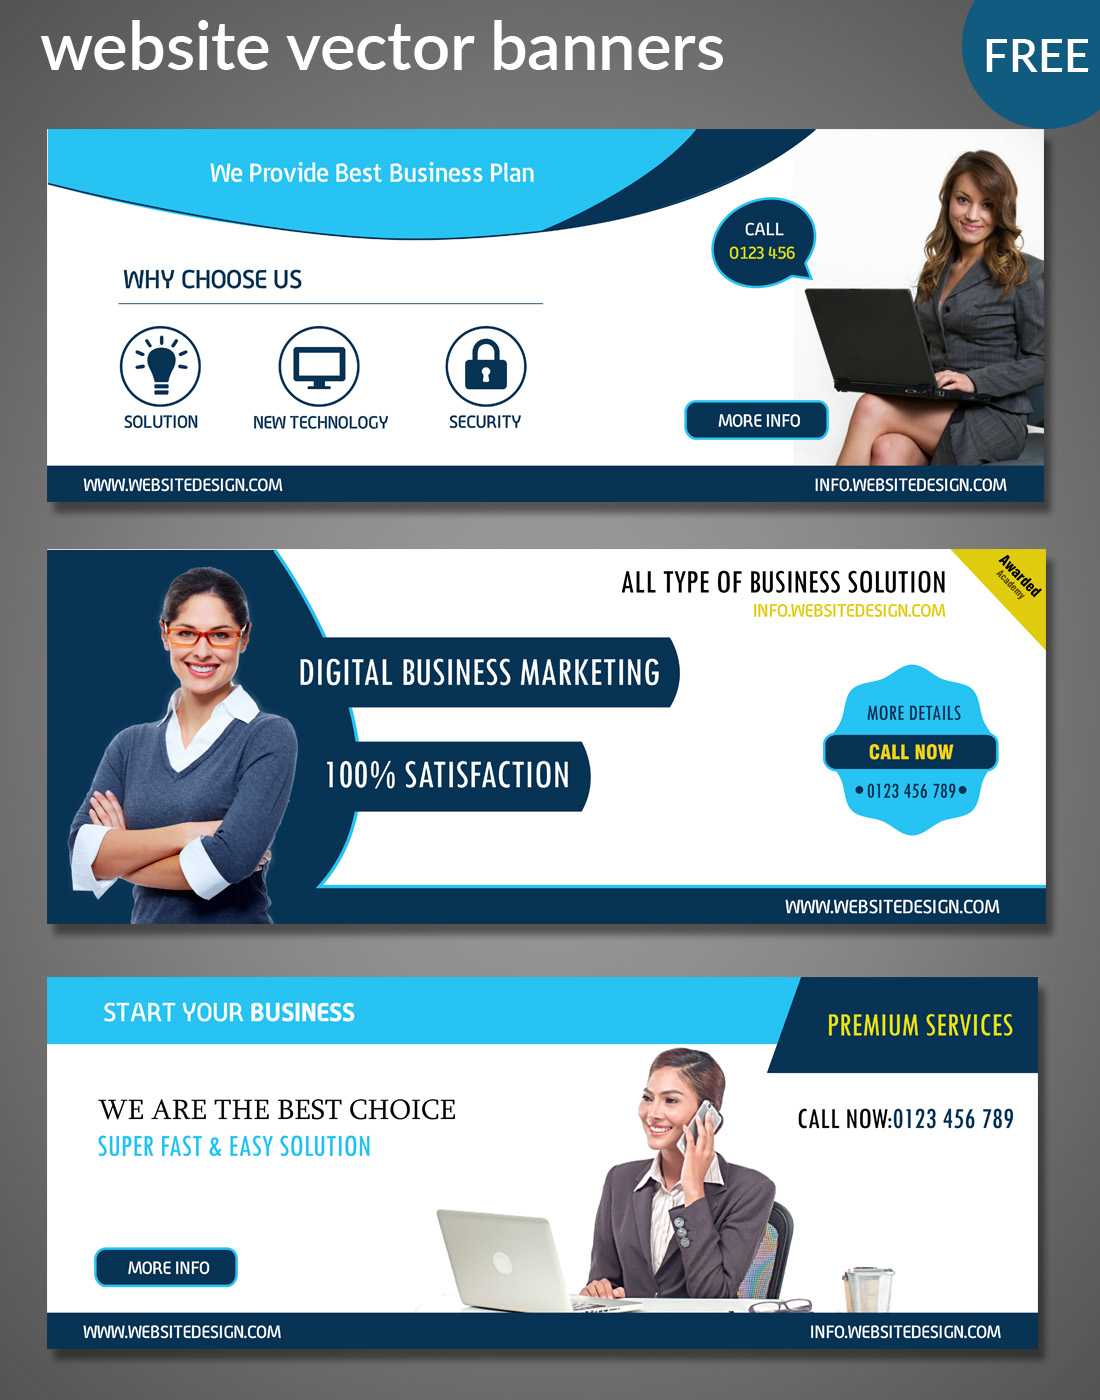 Website Banners Templates Throughout Website Banner Templates Free Download